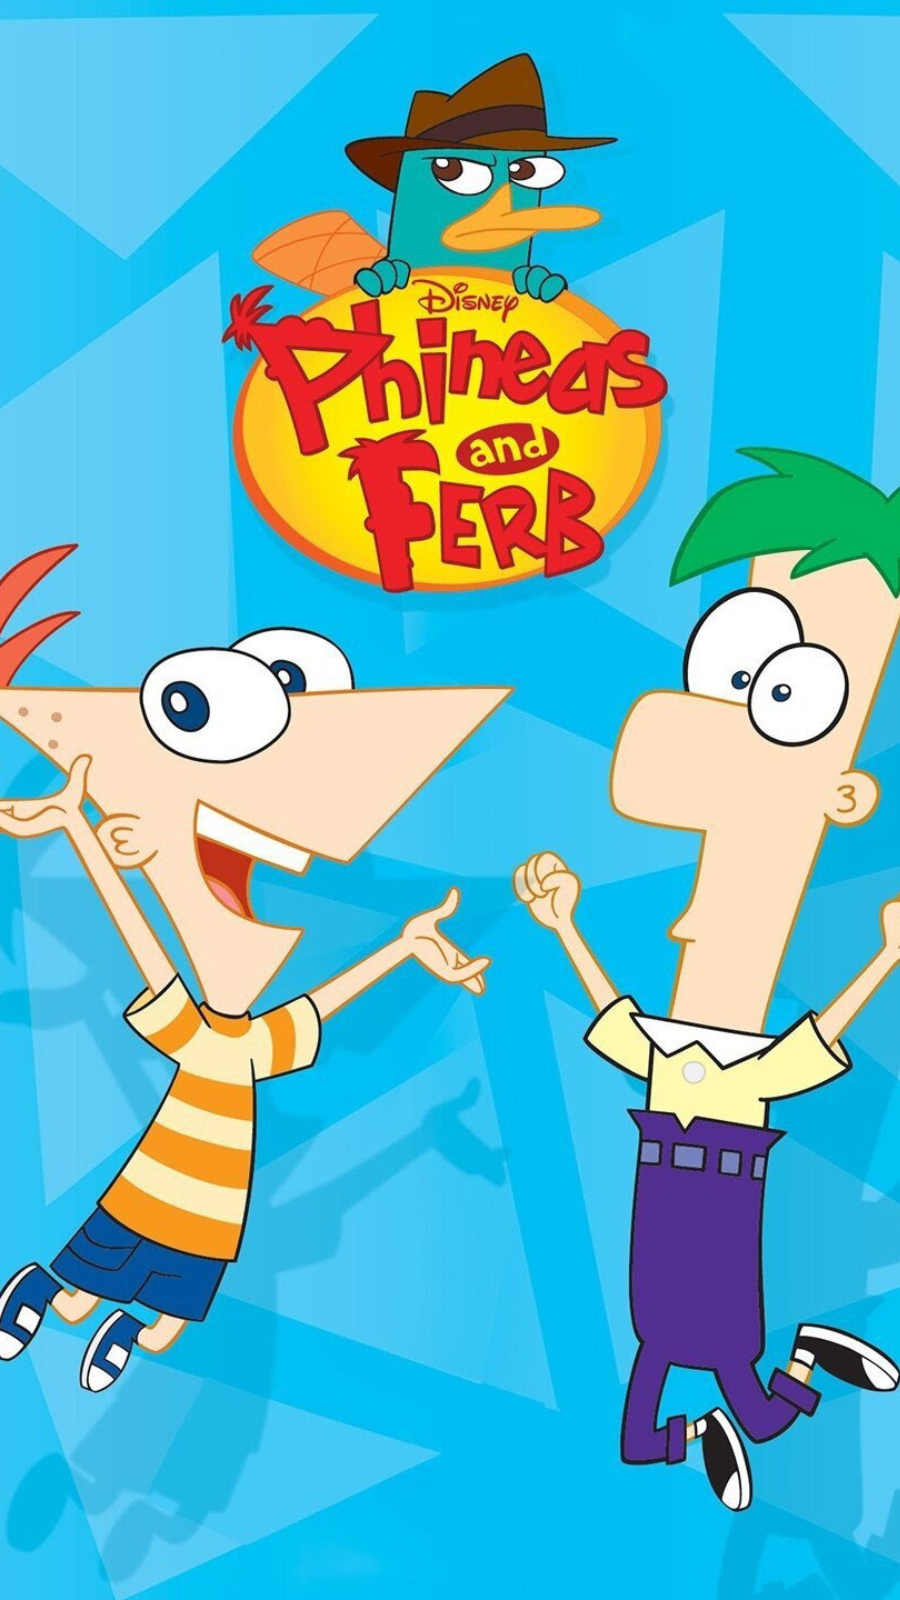 Phineas and Ferb Revival: Here’s everything you may want to know about release window, where to watch, plot and more \ 